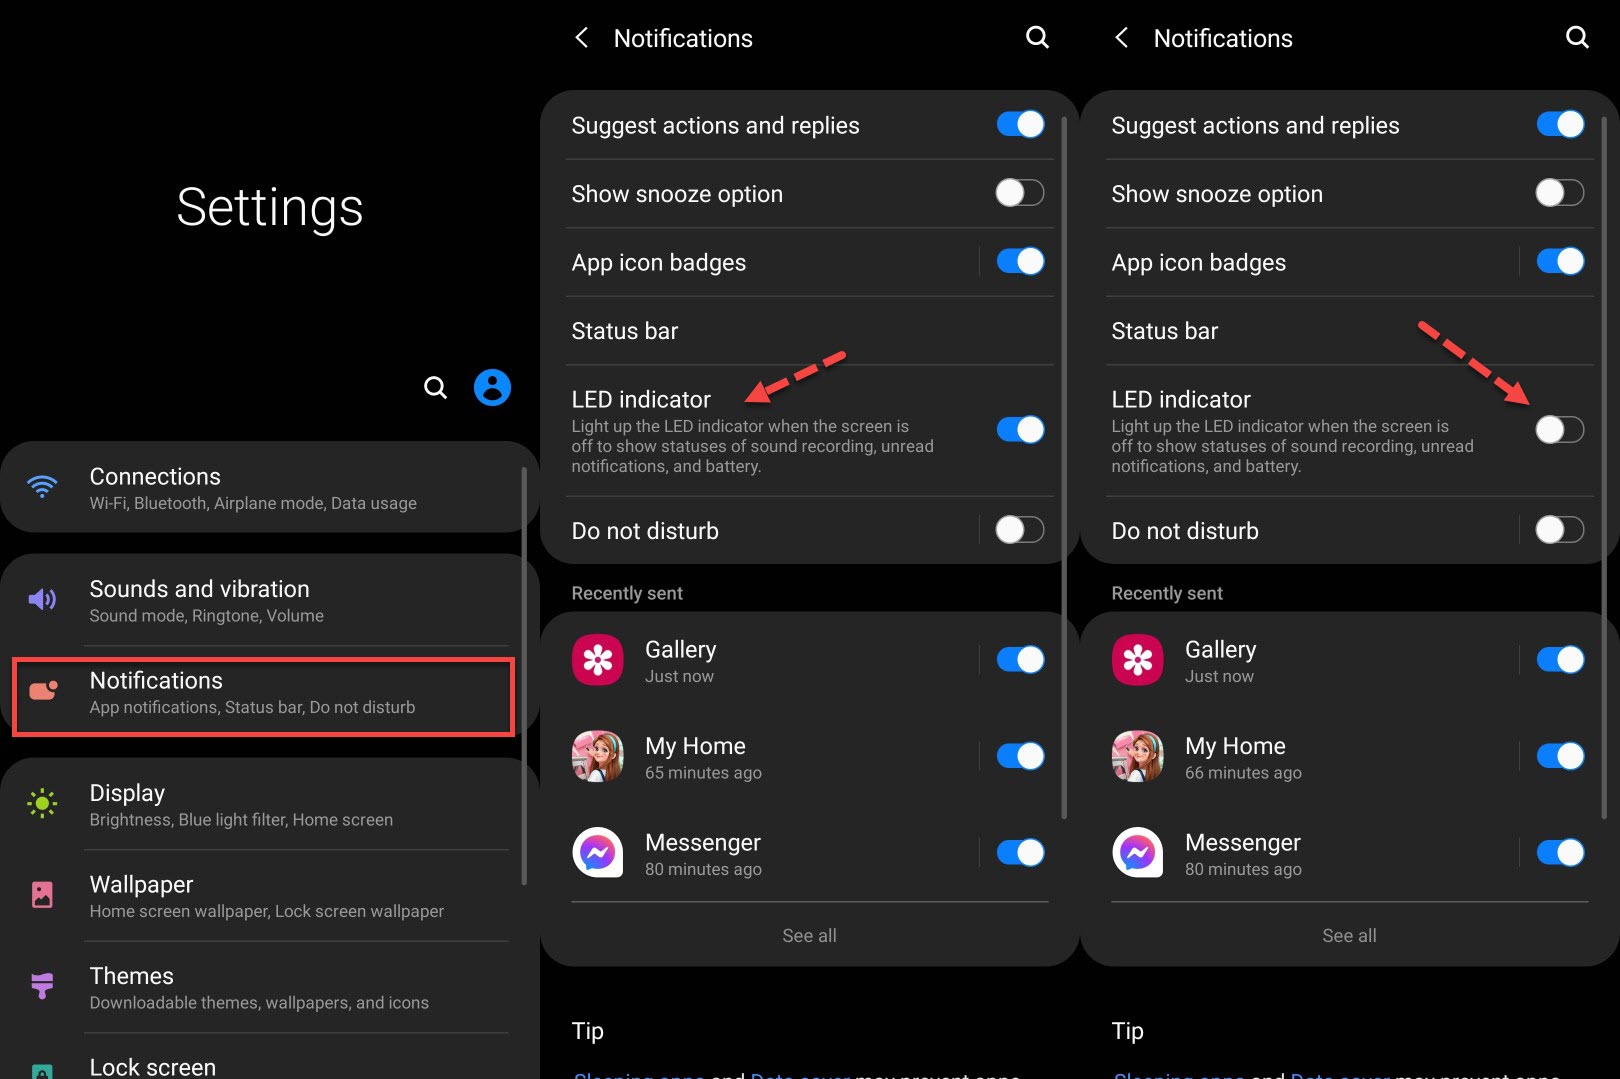 How to Disable LED Indicator on Samsung Galaxy S9, S9+, S8, S8+ & etc